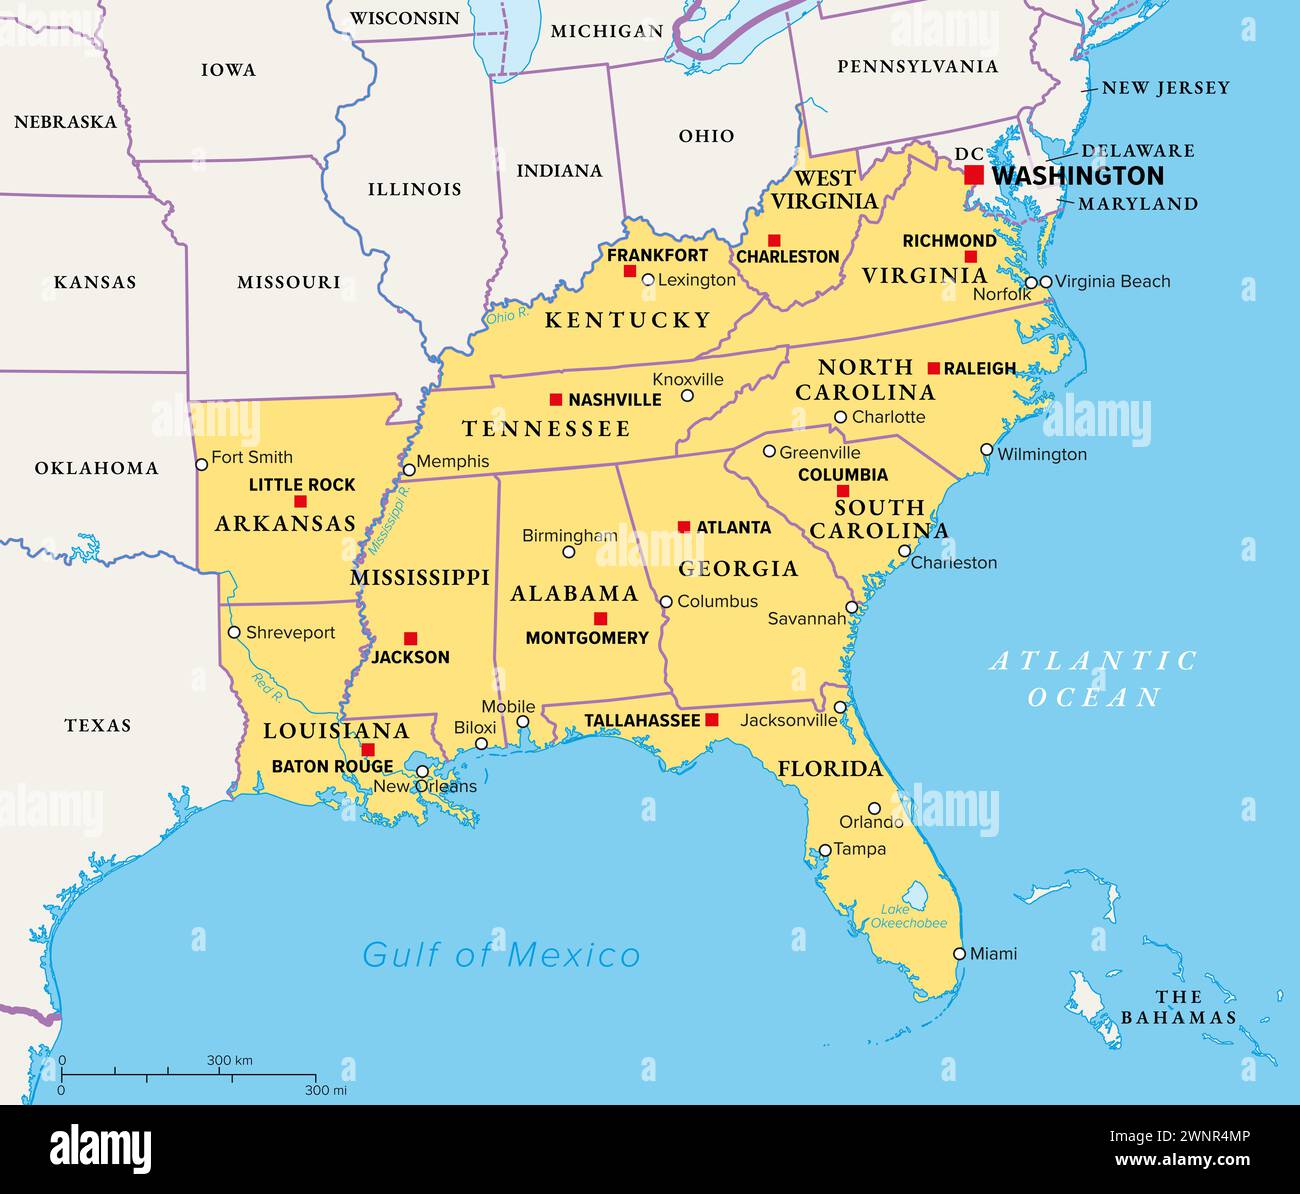 Southeast Region, the South of the United States, political map. Geographic and cultural region, also referred to as the Southern United States. Stock Photo